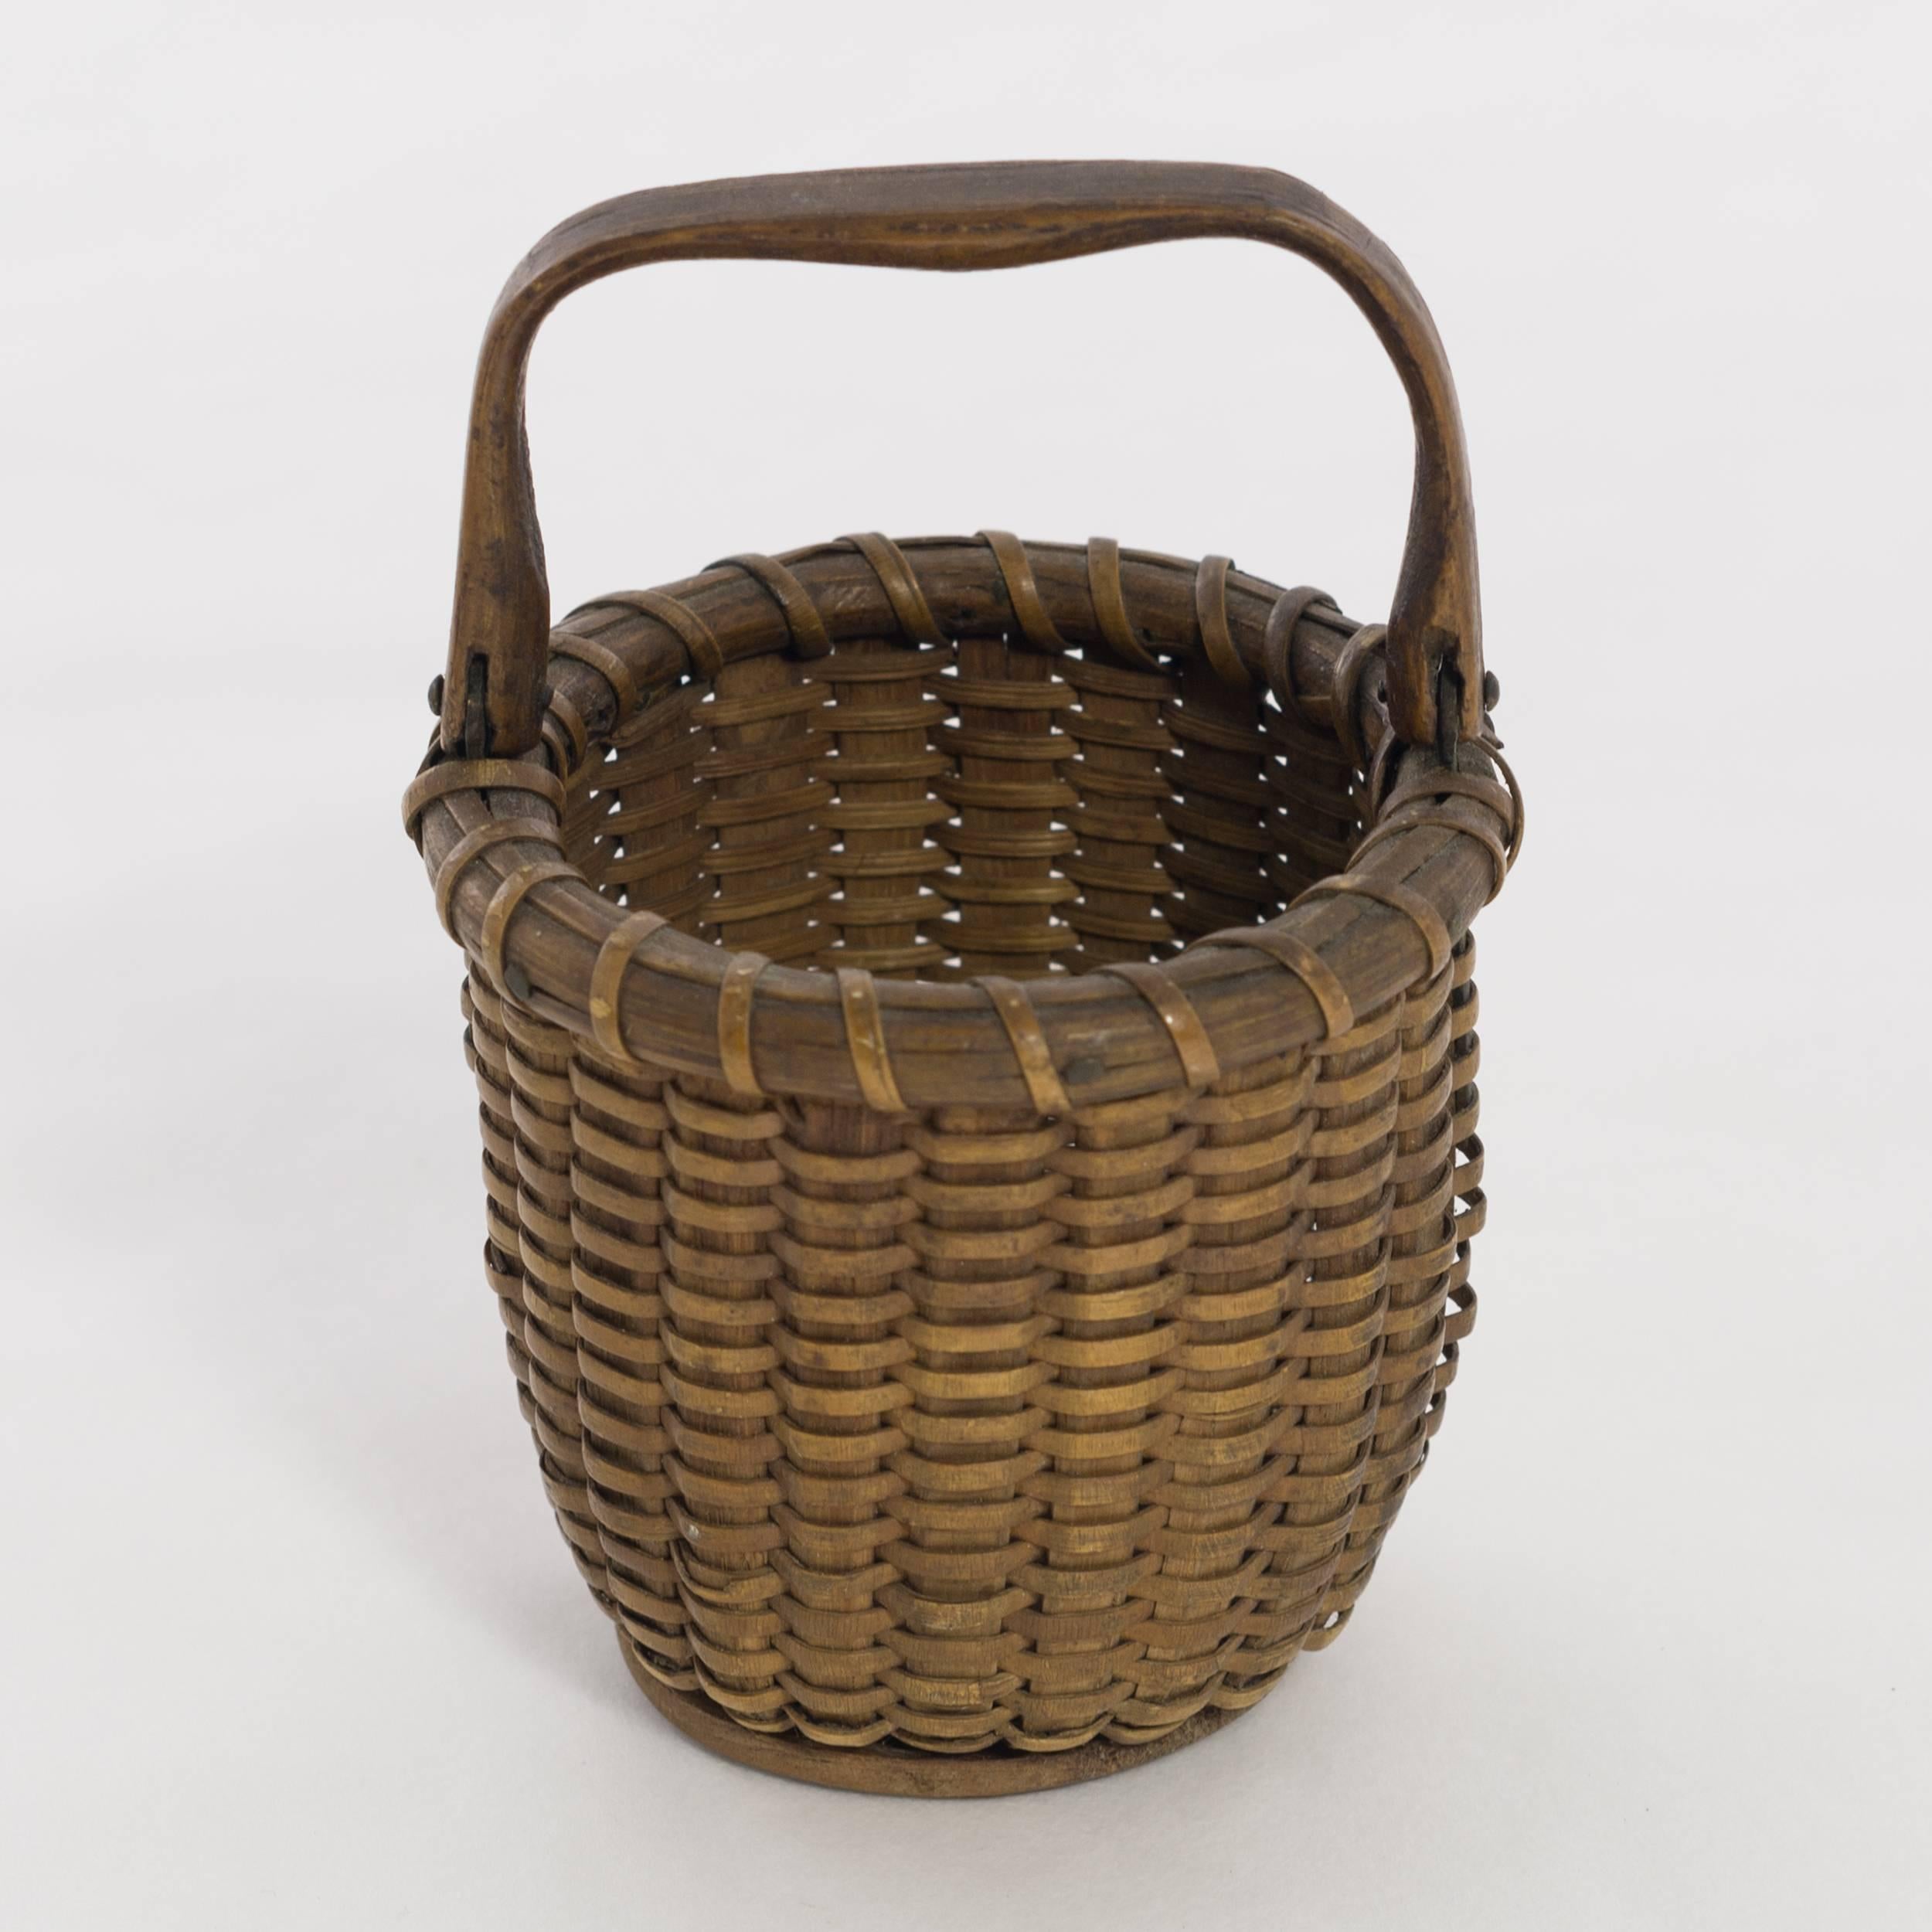 Miniature Nantucket lightship basket, made with oak staves and swing handle,
with a maple base. Attributed to Clinton Mitchell Ray, circa 1930.